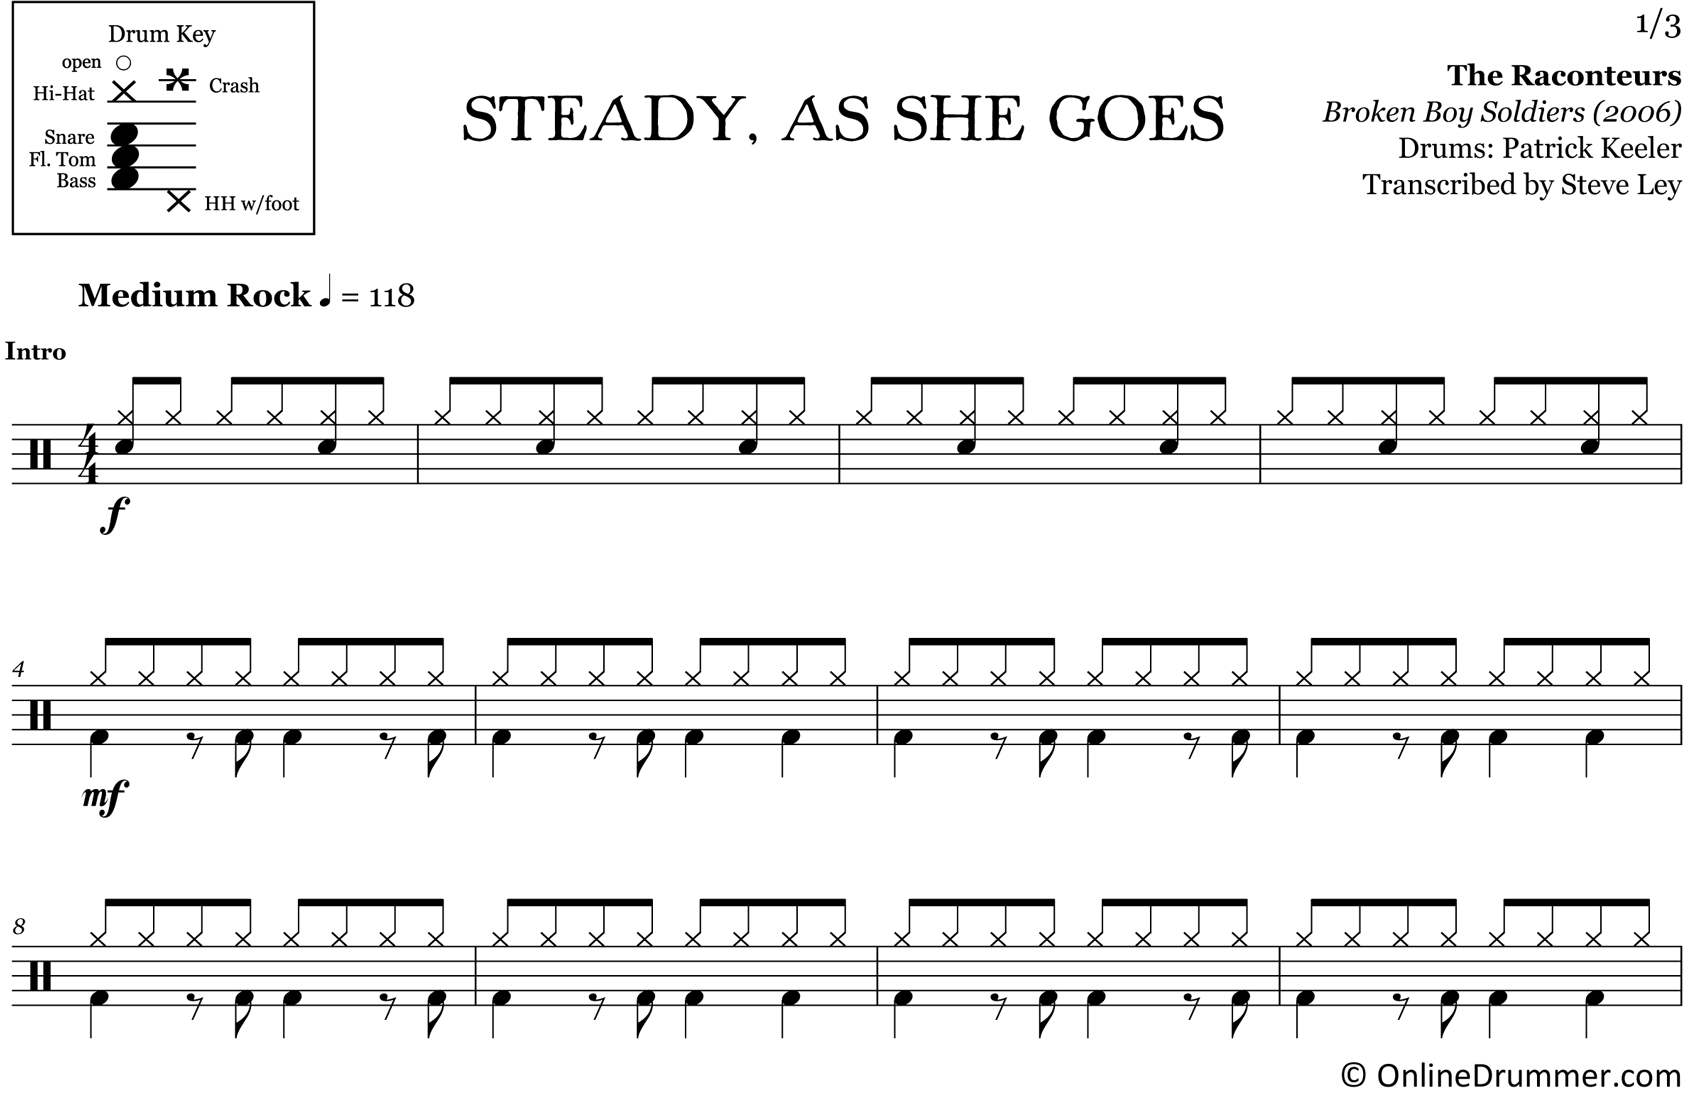 Steady, As She Goes - The Raconteurs - Drum Sheet Music